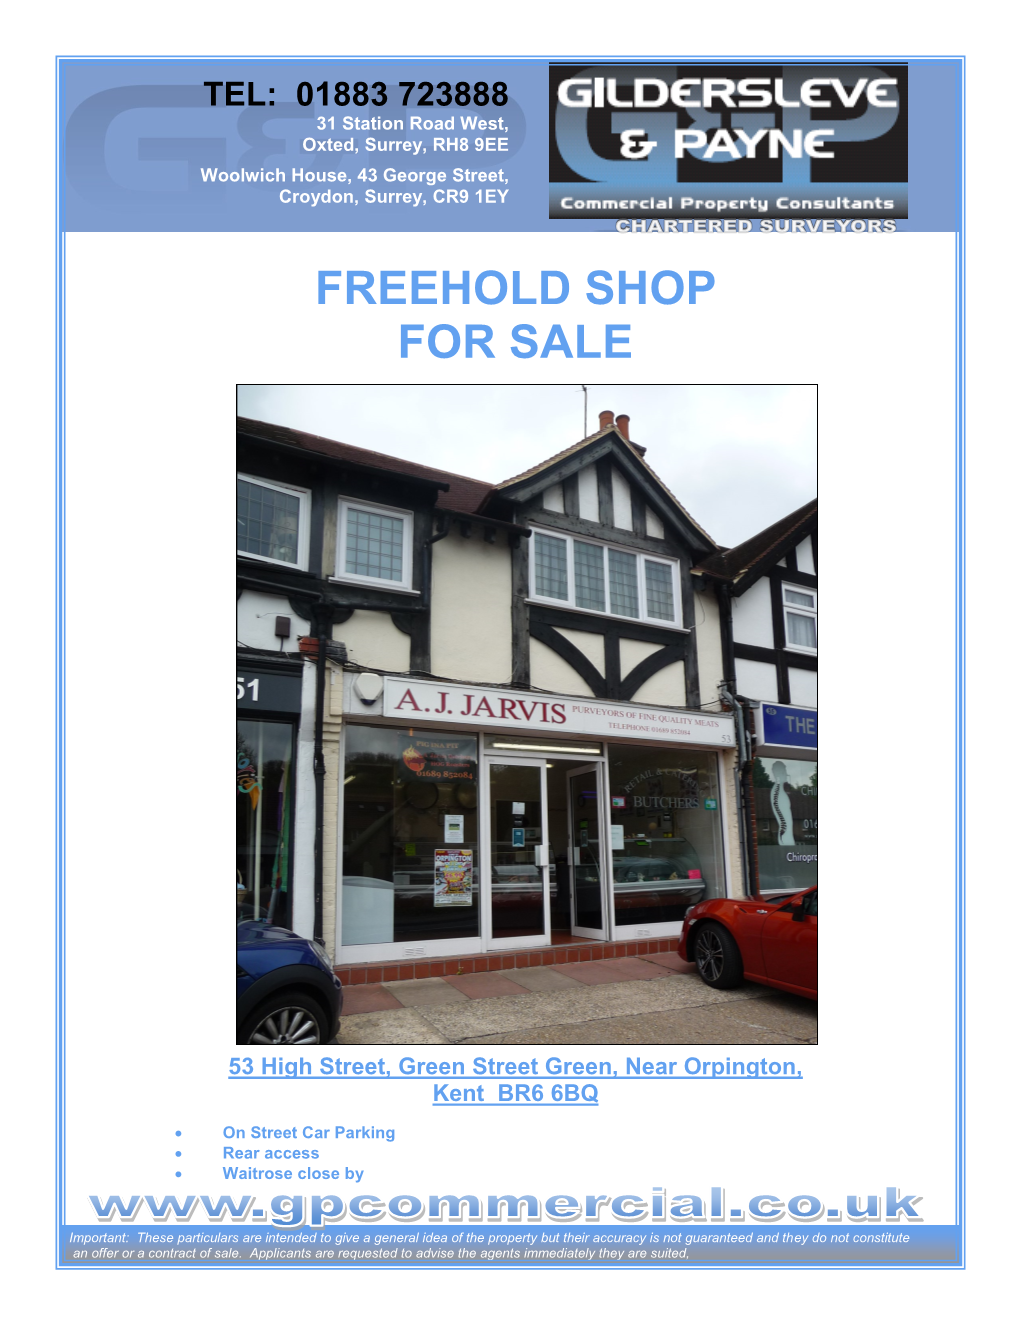 Freehold Shop for Sale